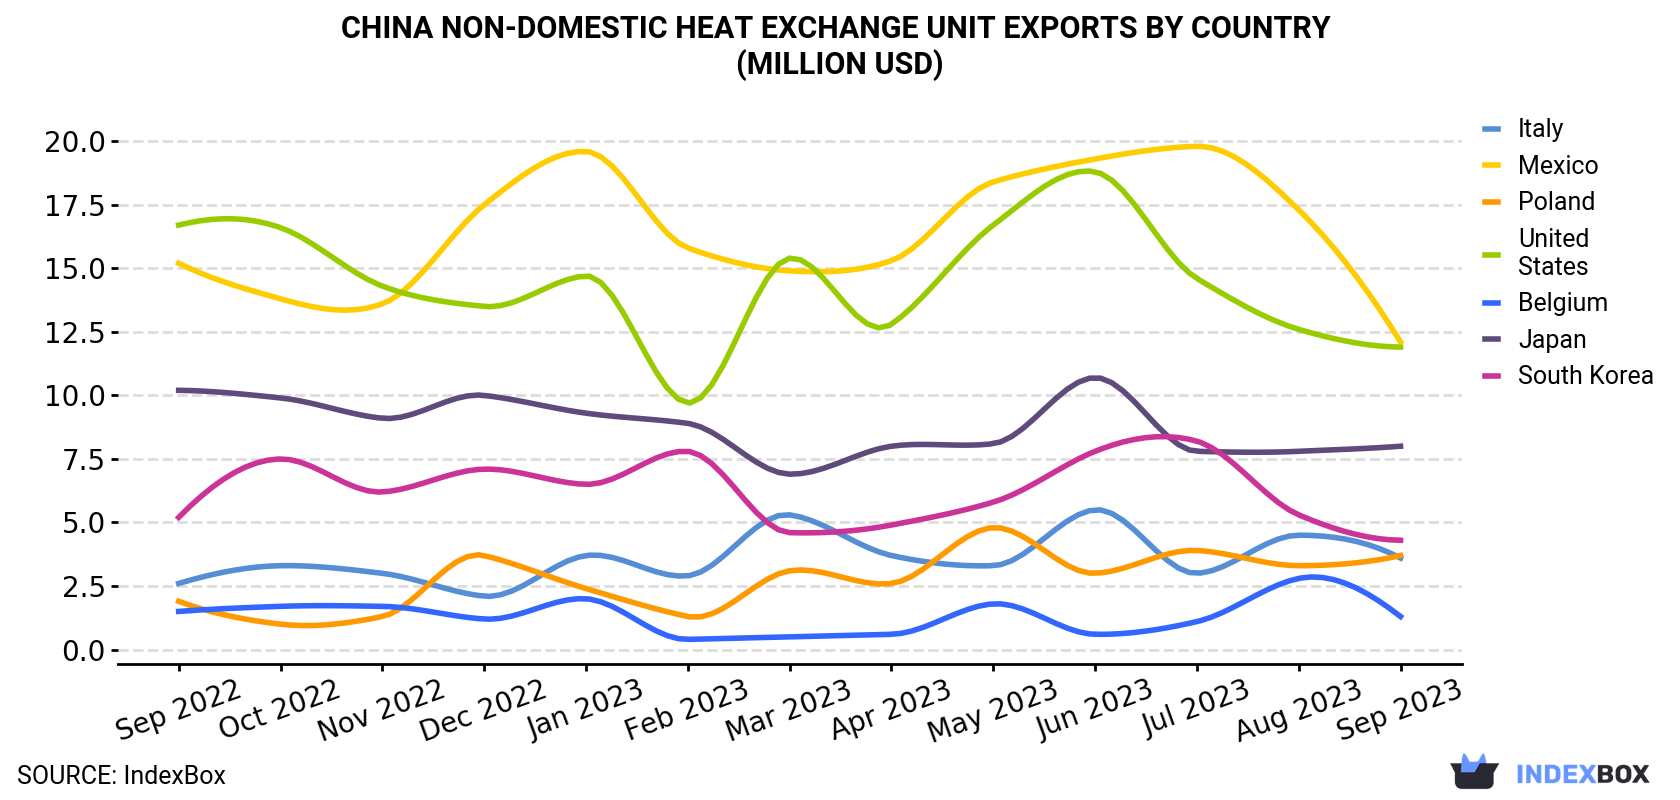 China Non-Domestic Heat Exchange Unit Exports By Country (Million USD)